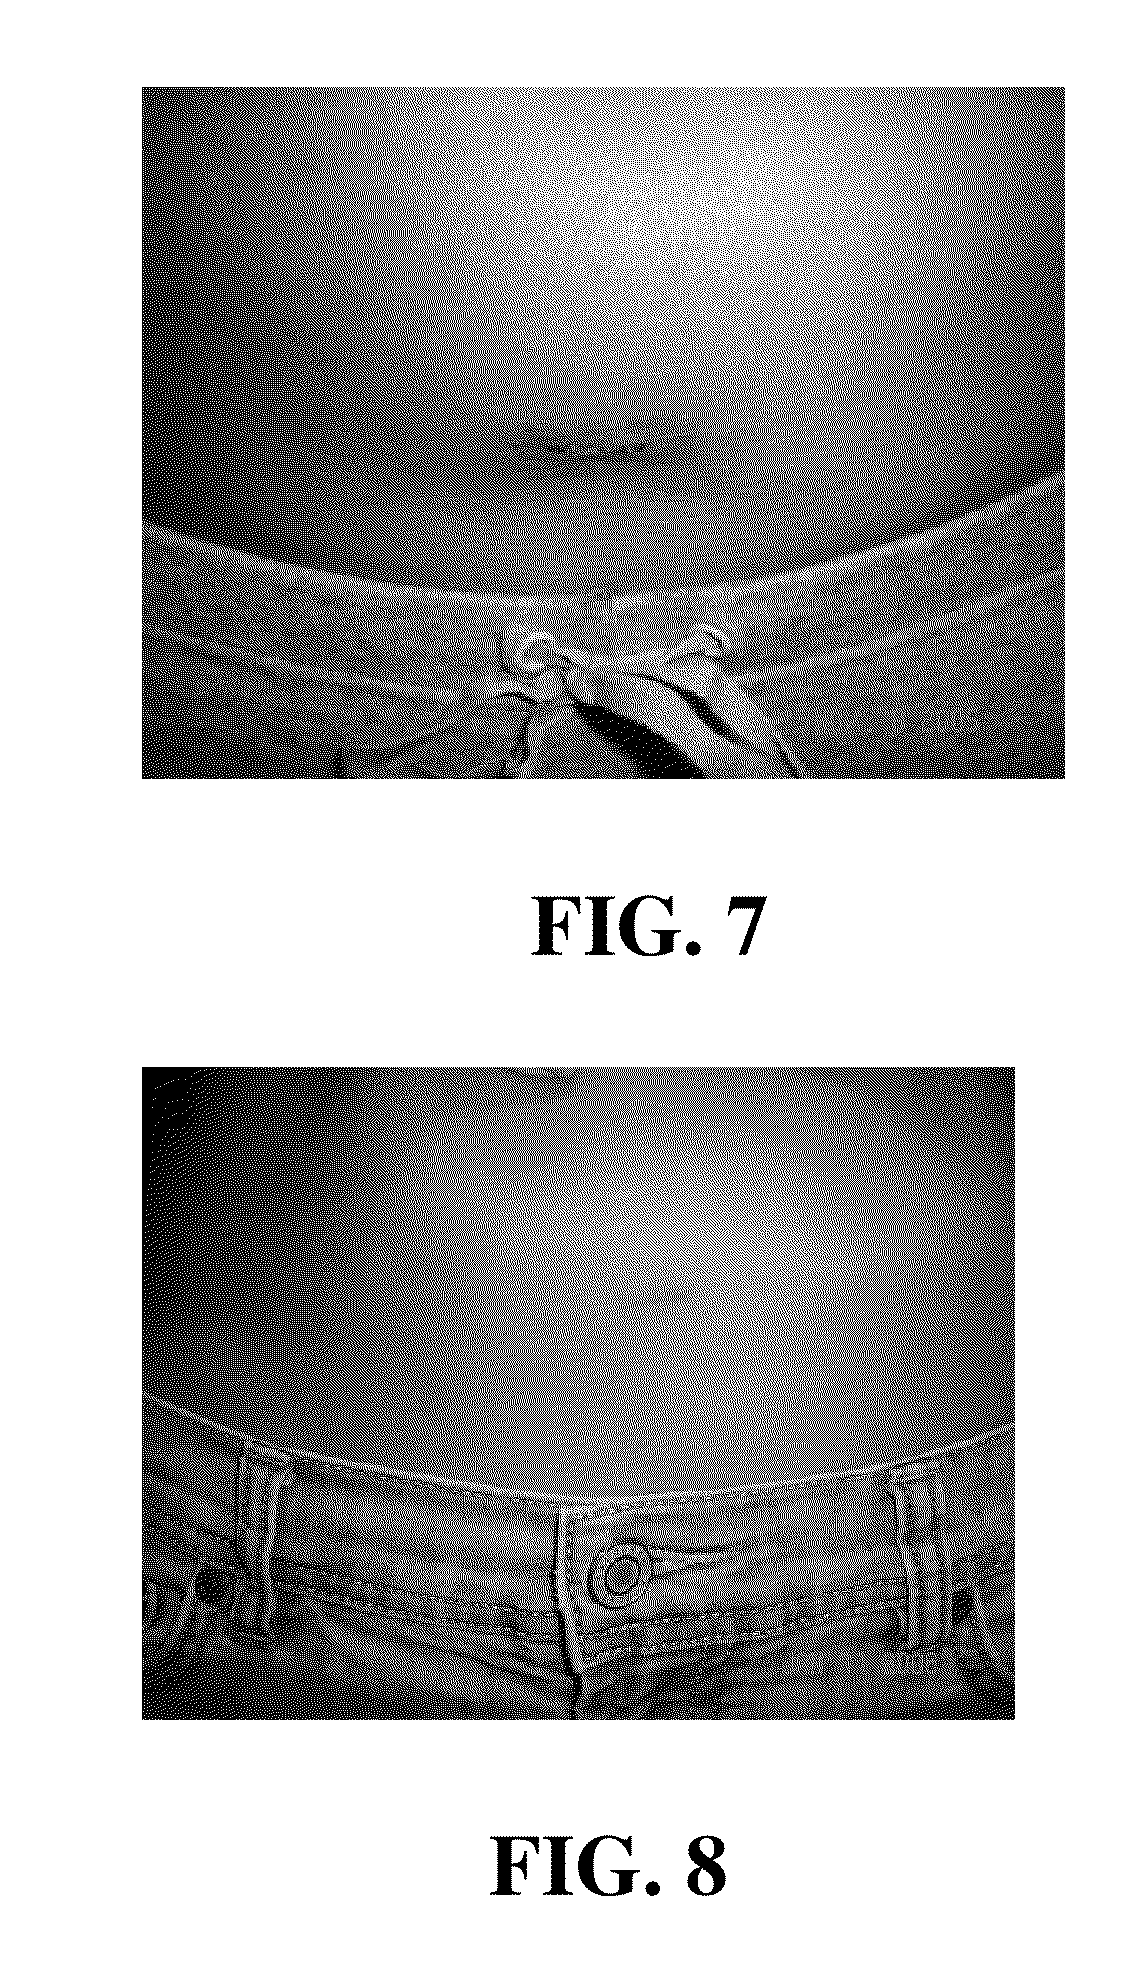 Compositions and methods for treatment of dermal scarring and wrinkling